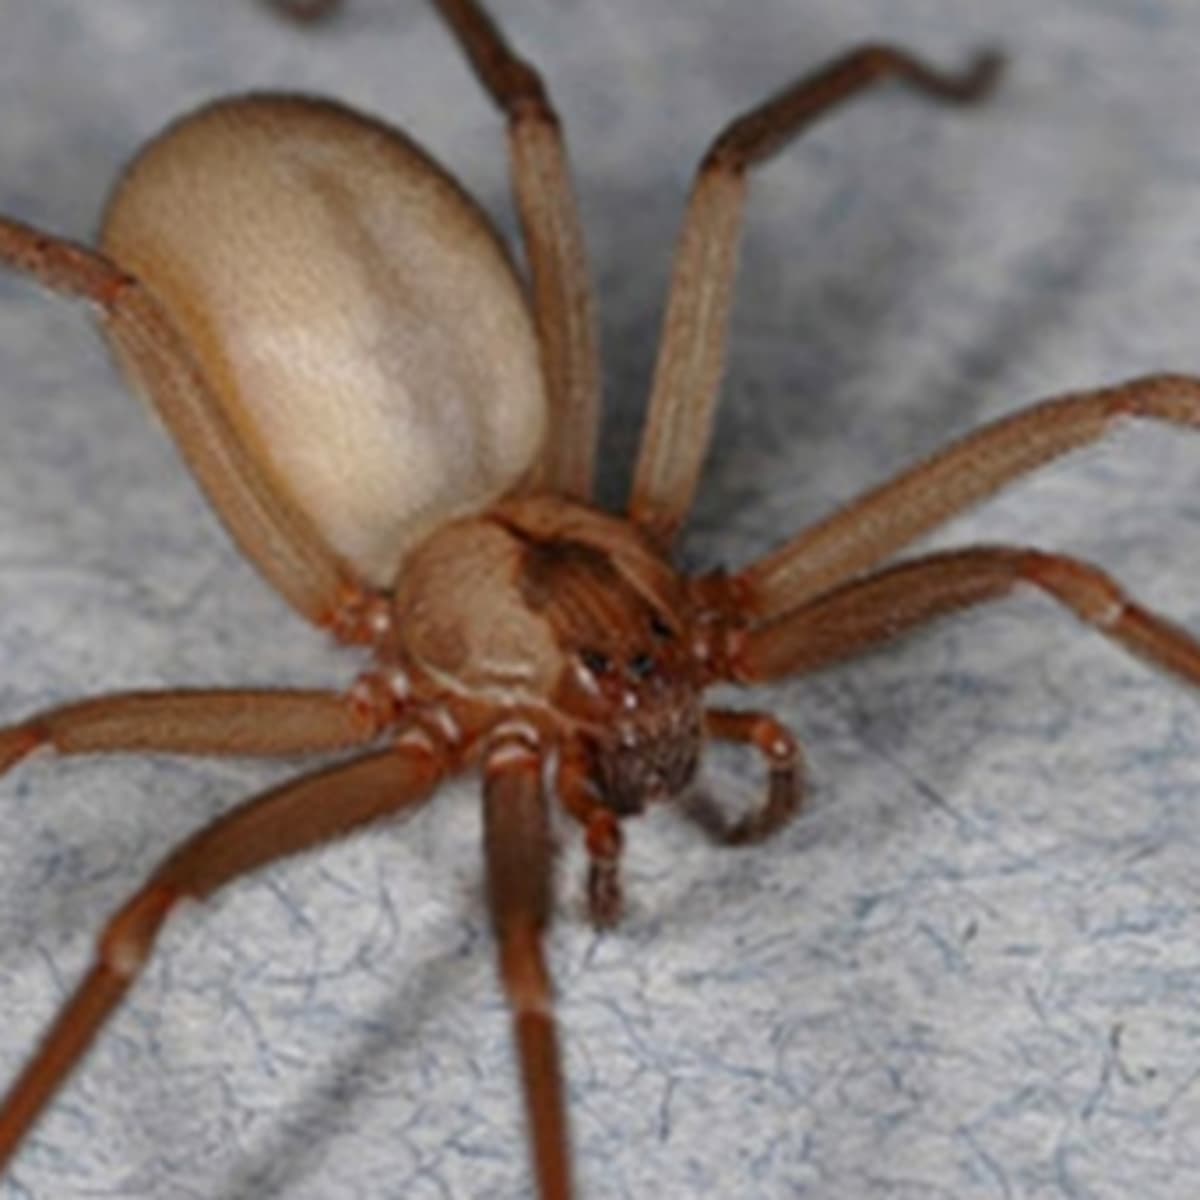 10 Types of House Spiders